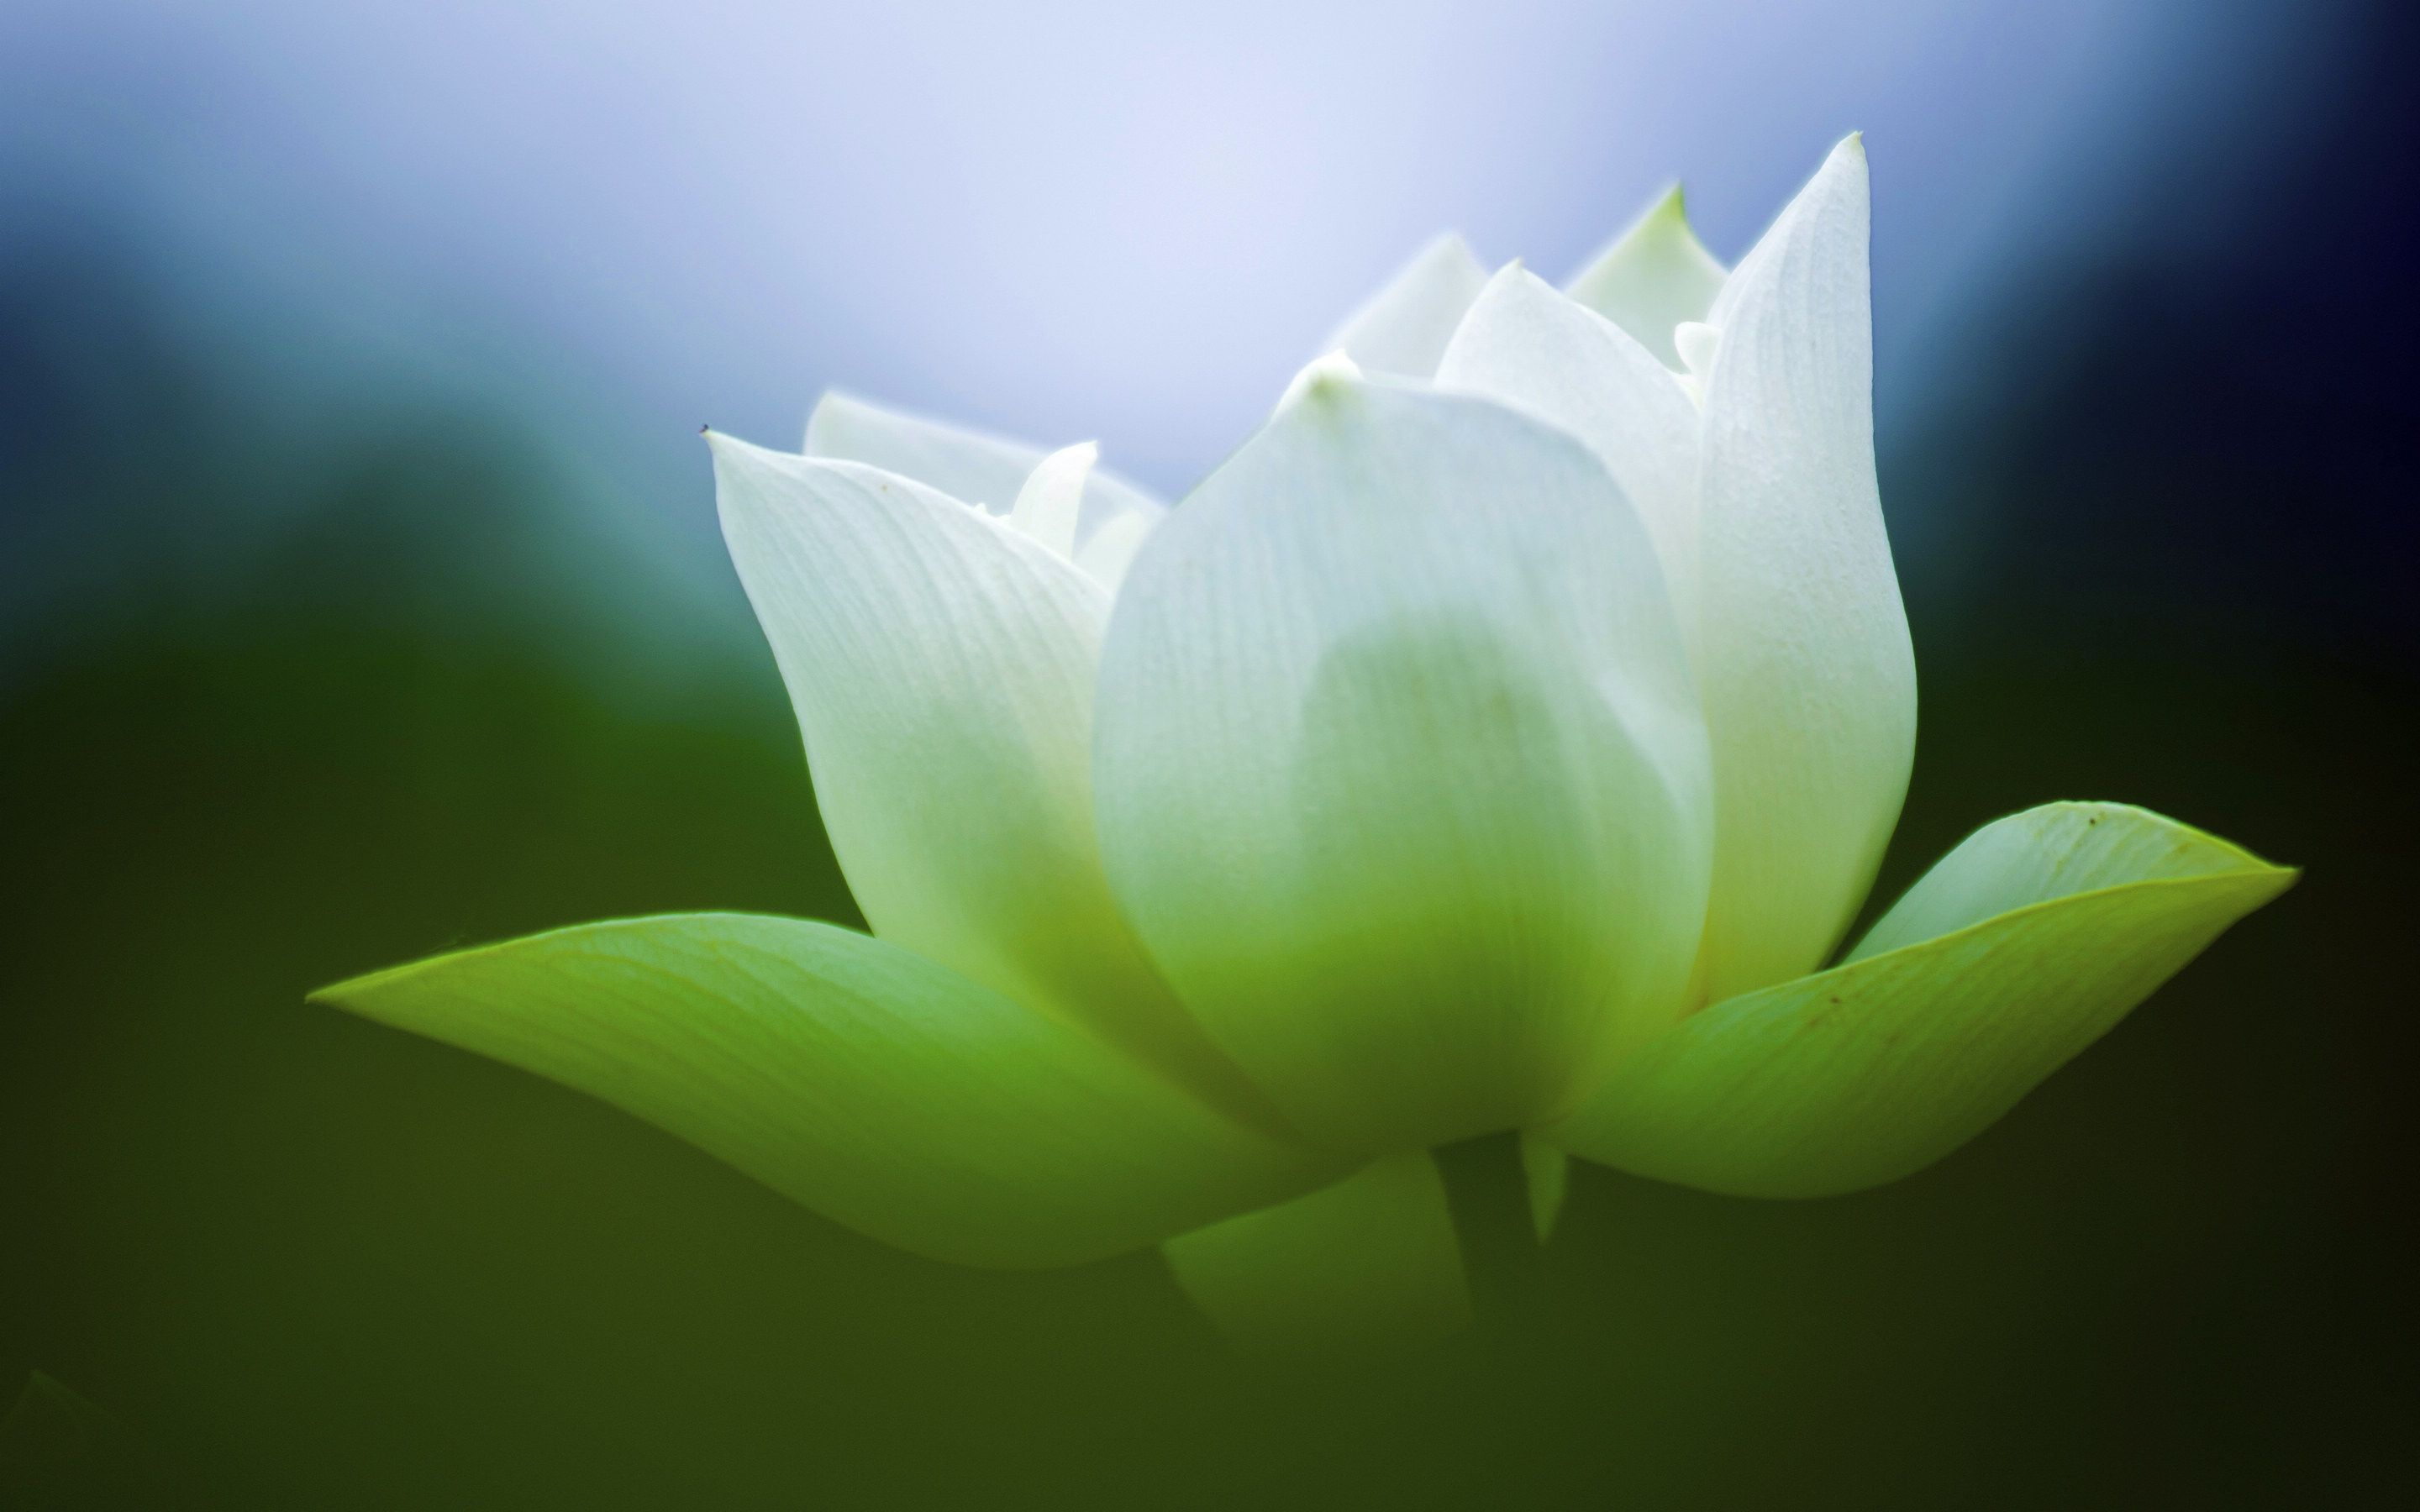 Lotus Windows 8 Theme and Background | All for Windows 10 Free